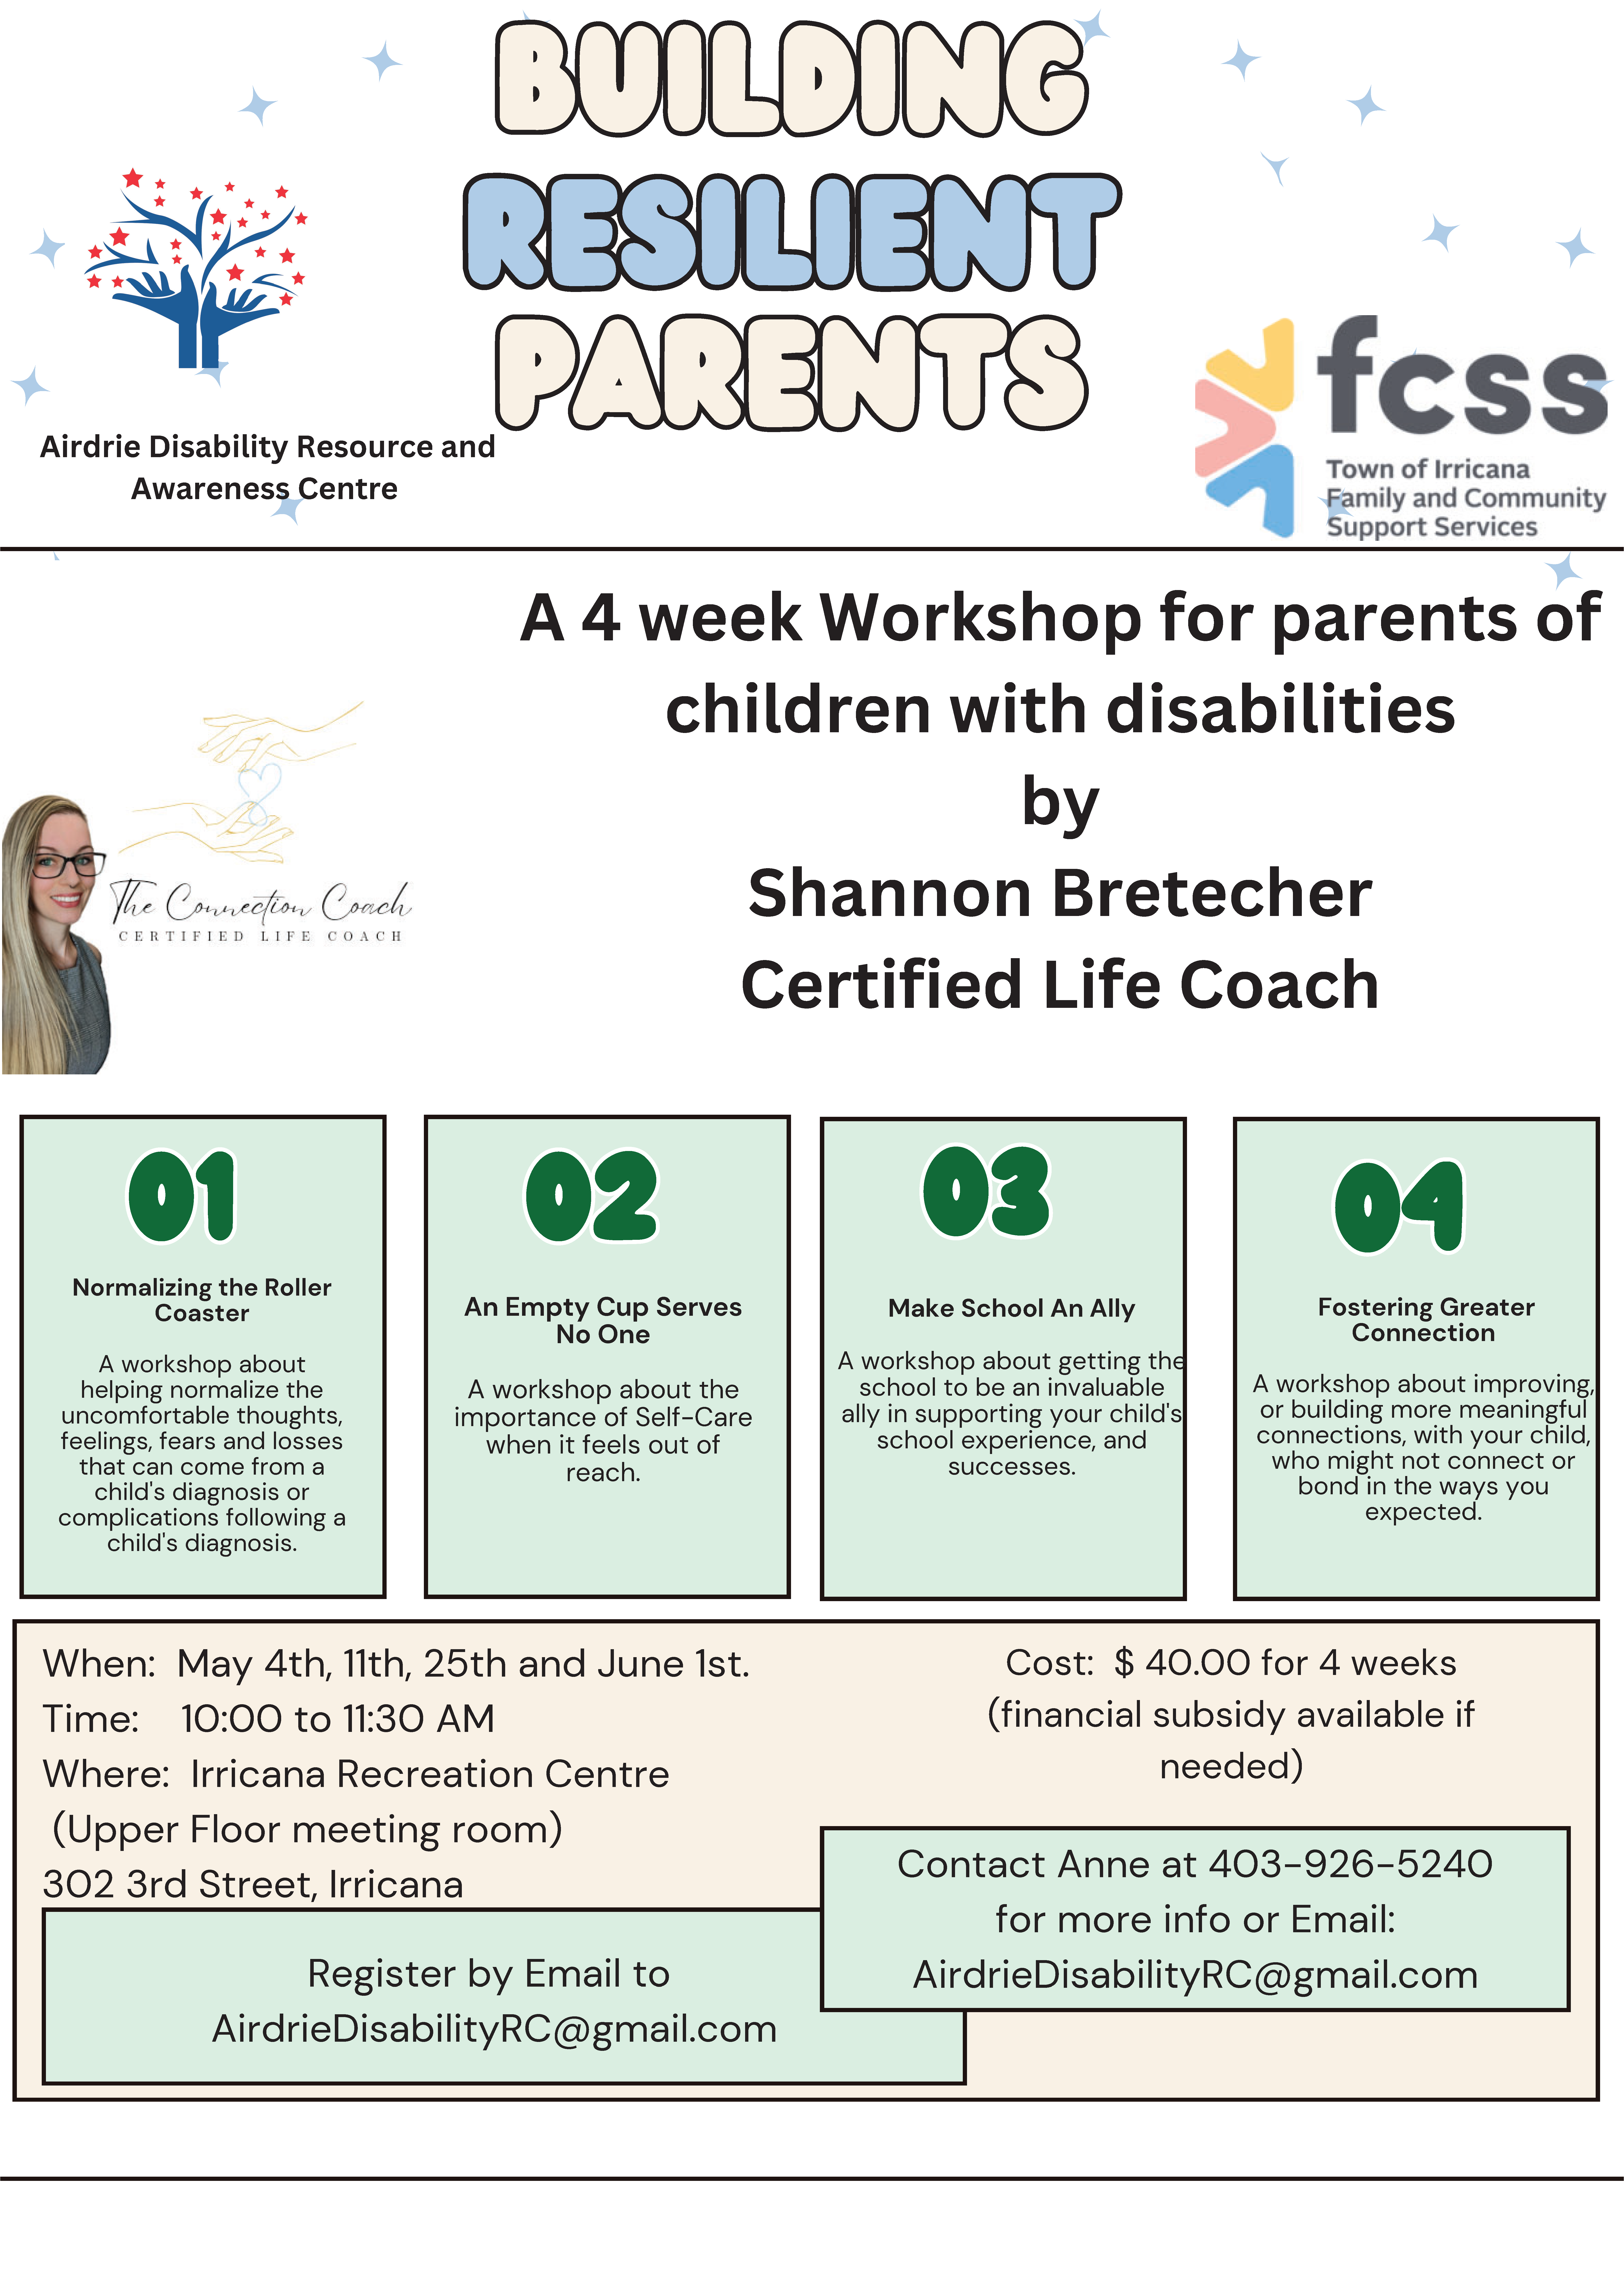 Building Resilient Parents Workshop presented by the Airdrie Disability and Awareness Resource Centre